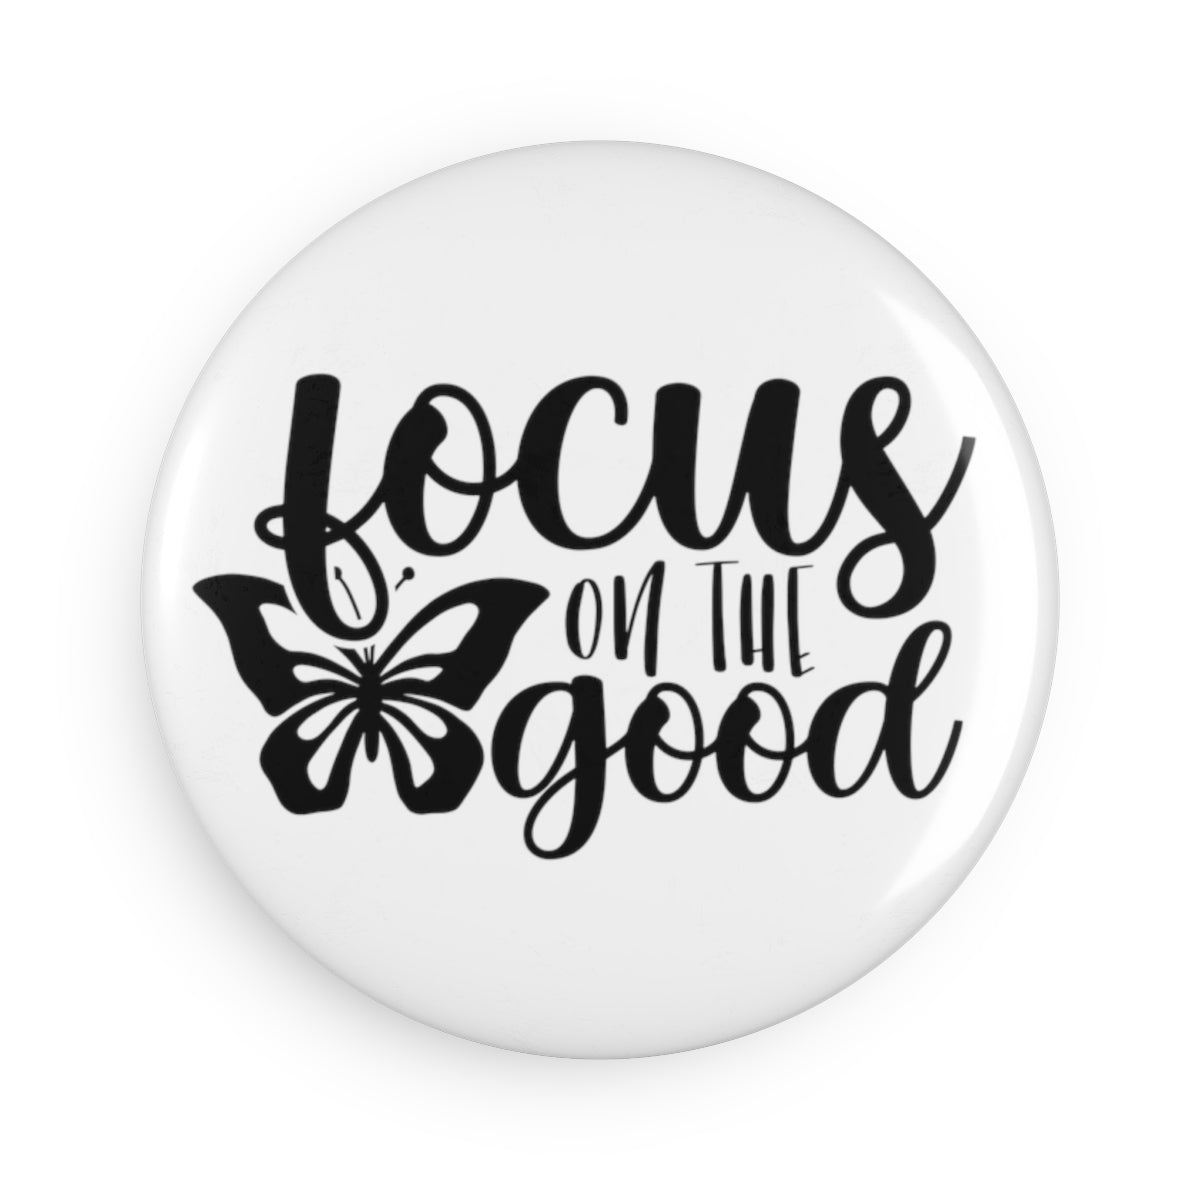 Focus on the good Button Magnet, Round (1 & 10 pcs)